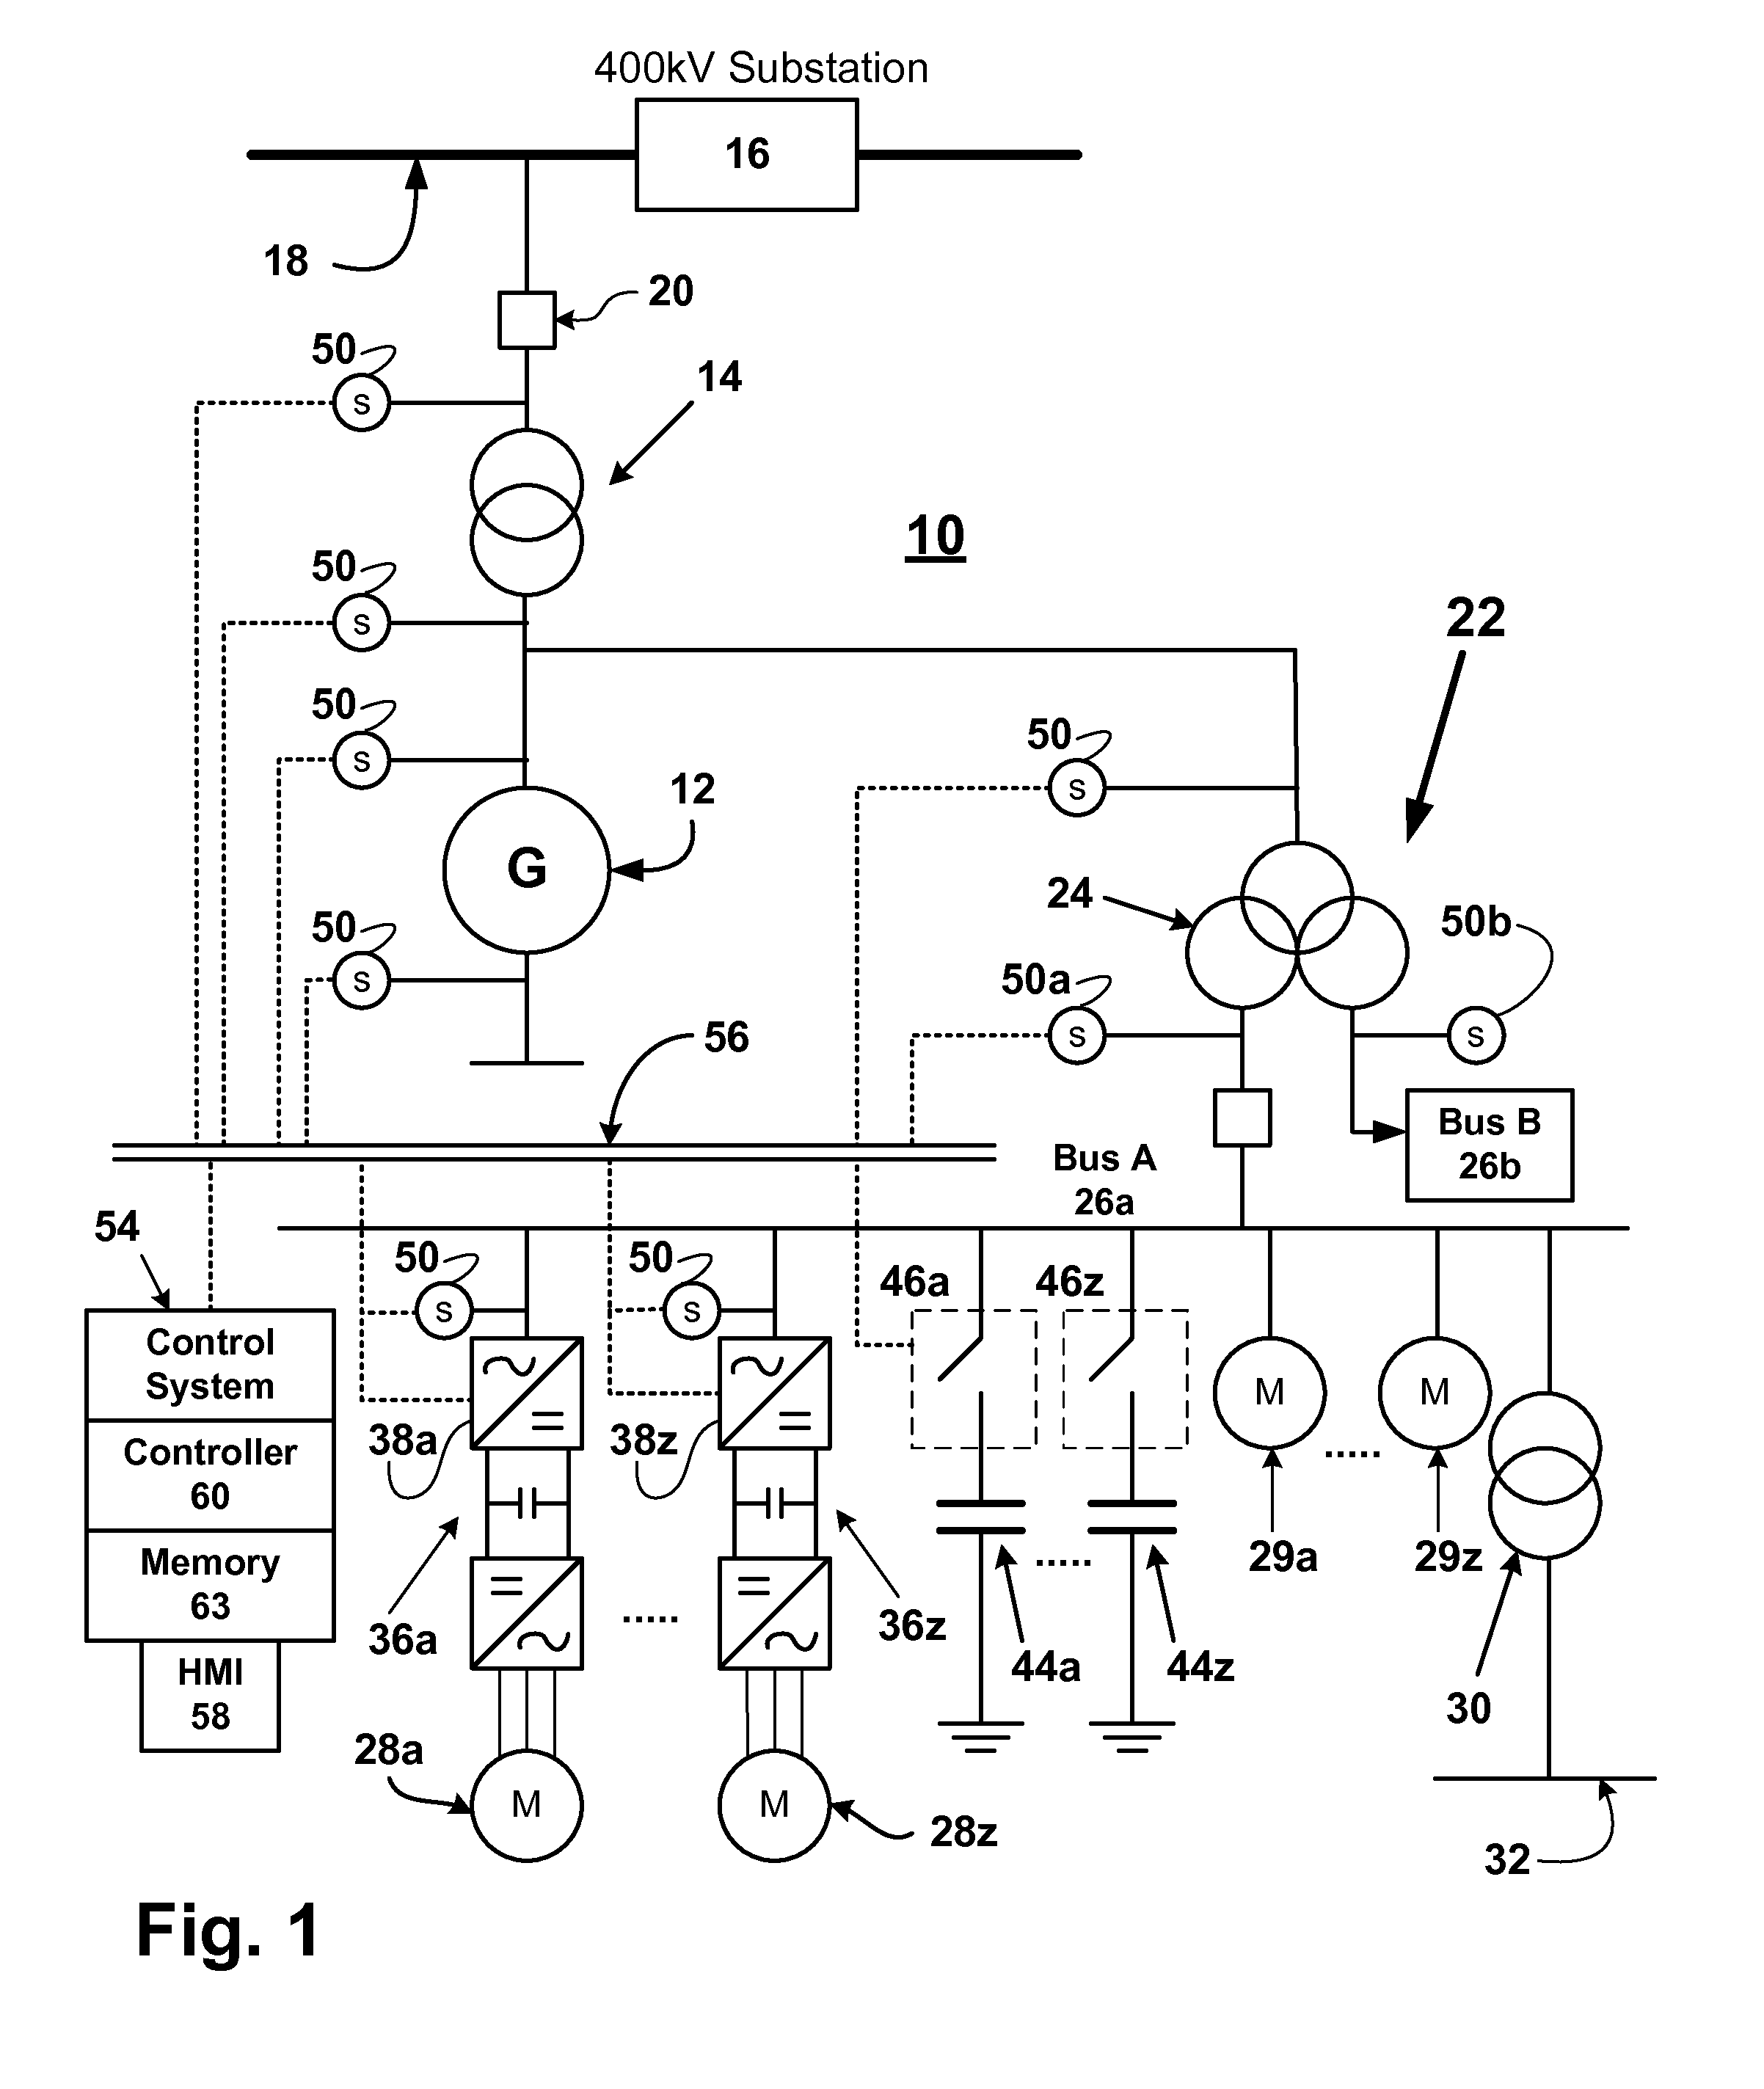 Method and apparatus for improving the operation of an auxiliary power system of a thermal power plant